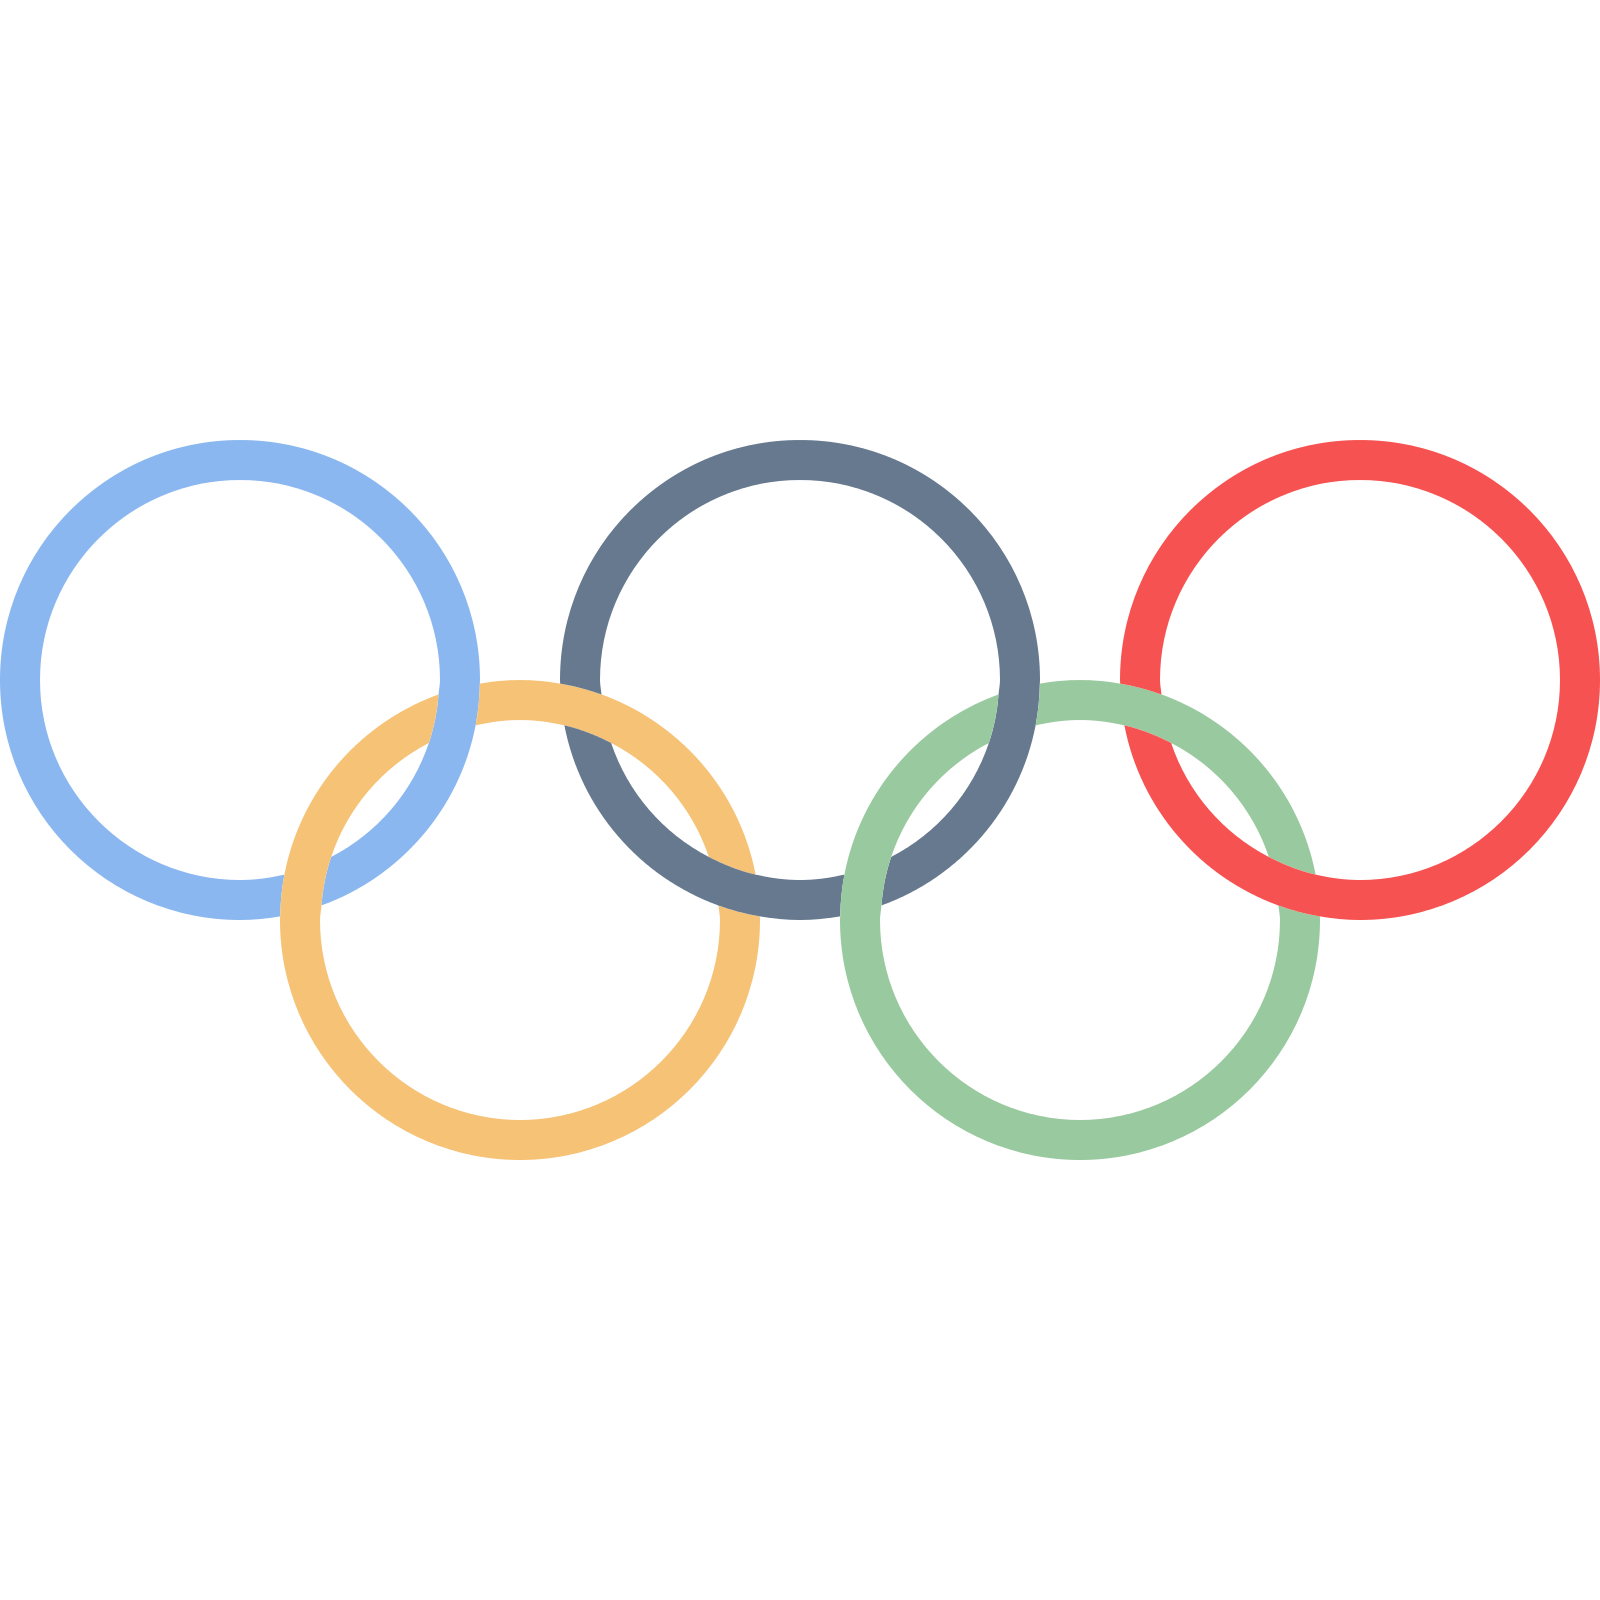 Olympic Olympics Winter Area Text Symbols Games PNG Image